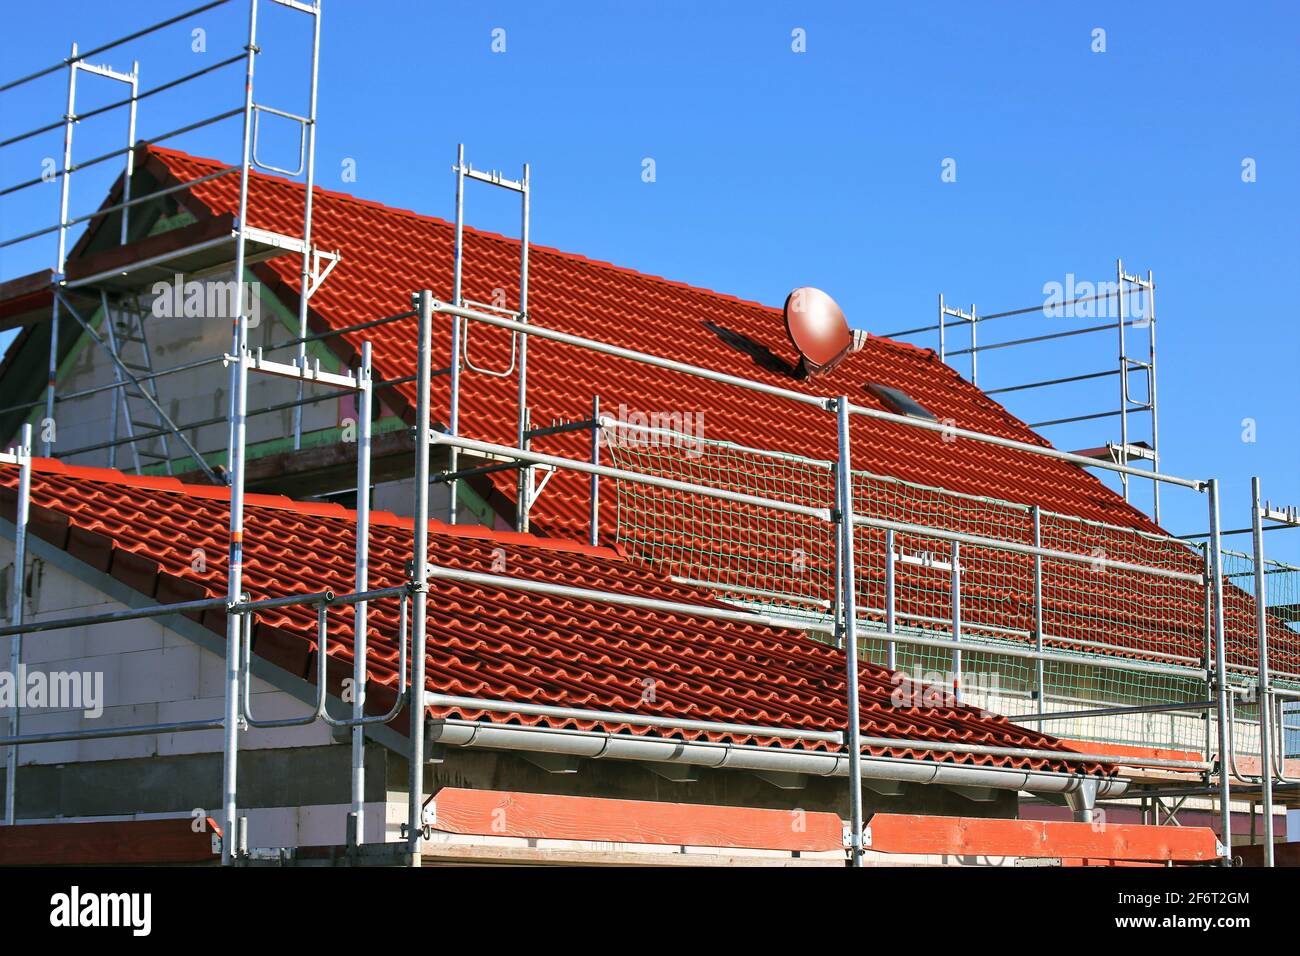 New tile roof on a residential house. Stock Photo